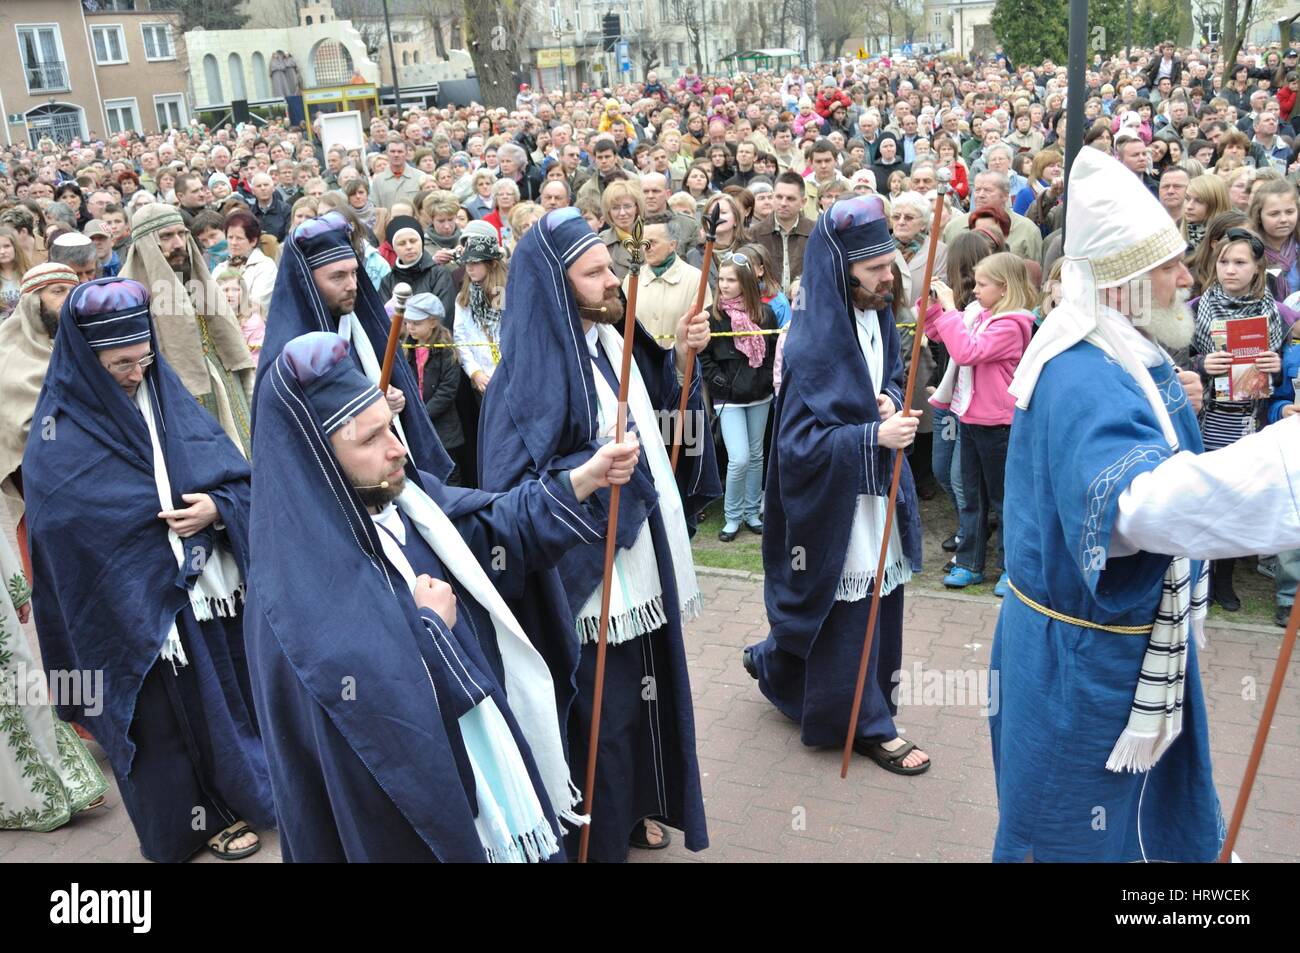 Actors reenact Sanhedrin members, going to Pilate, during the street performances Mystery of the Passion. Stock Photo